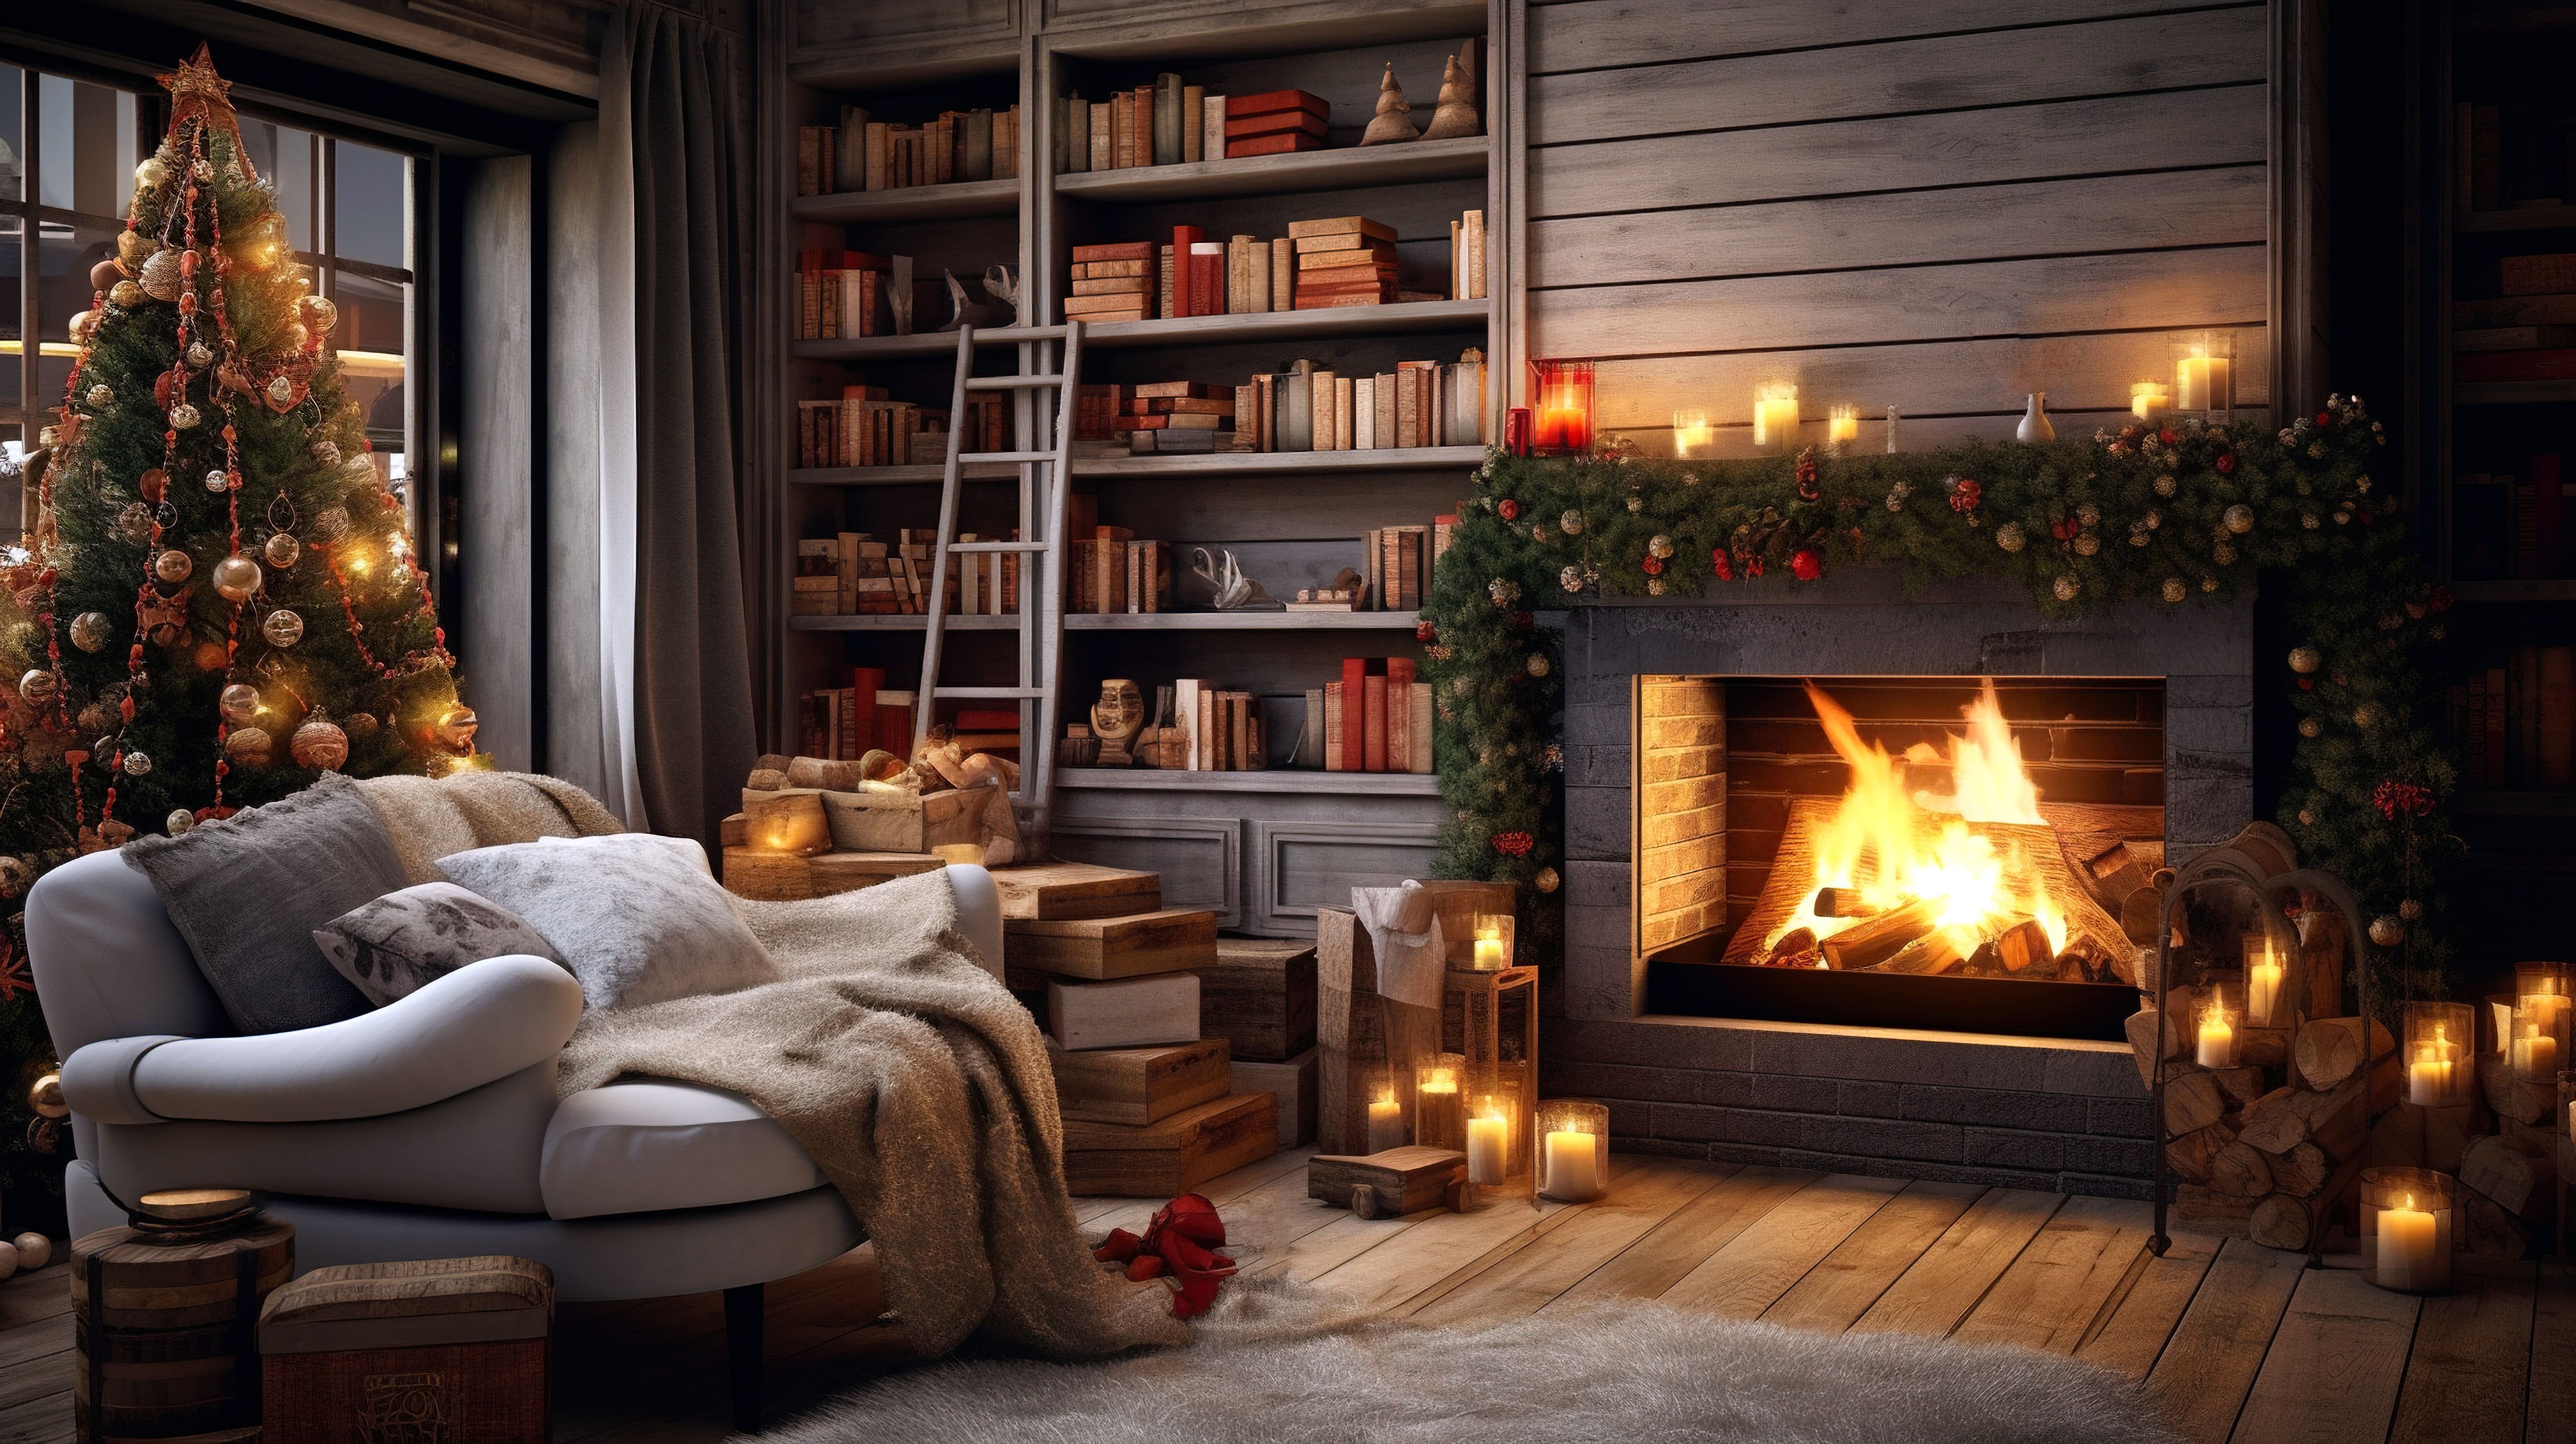 A cuddle chair amidst a flurry of decorations at Christmastime. A fire and several candles give off a warm and inviting glow in the background.